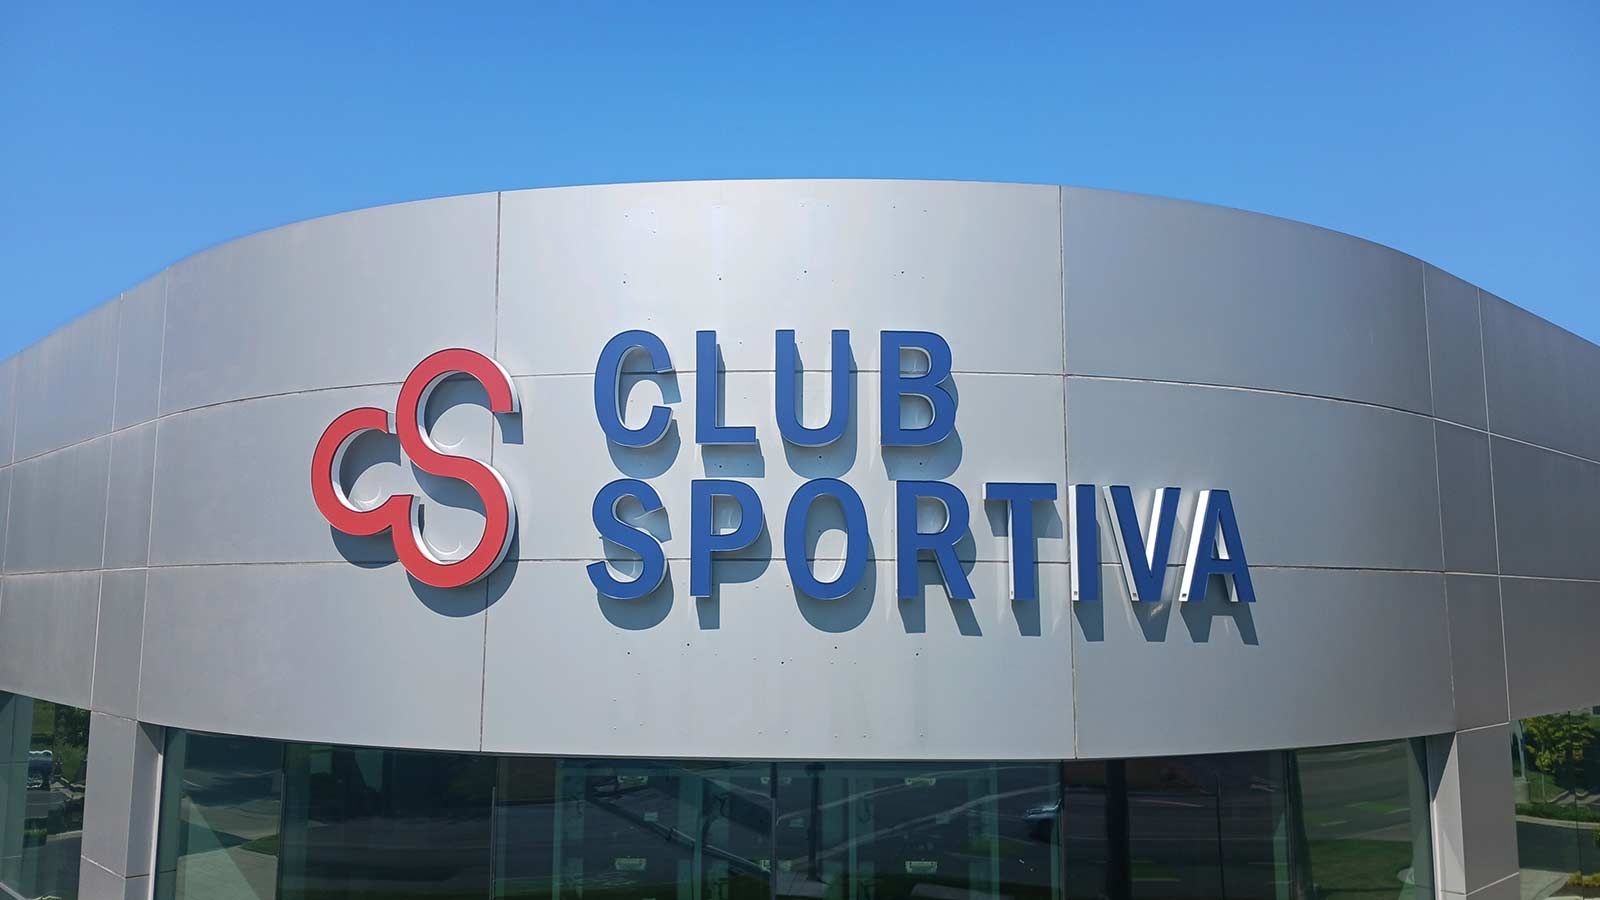 Club Sportiva channel letters mounted on the facade